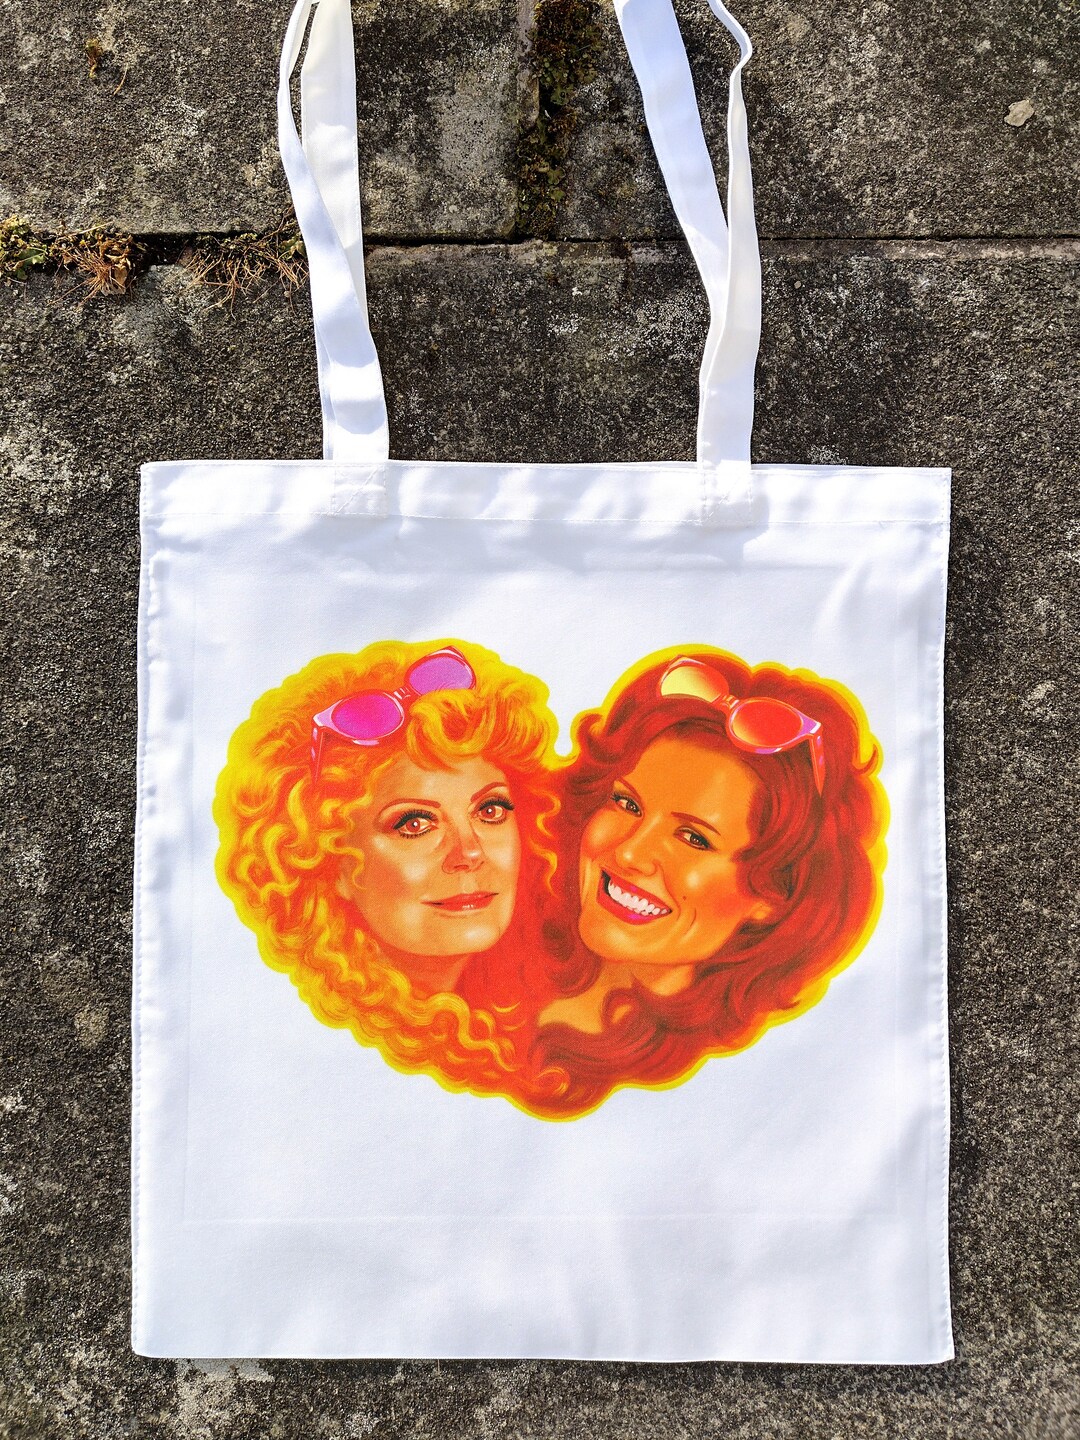 Thelma and Louise Eco Tote Bag